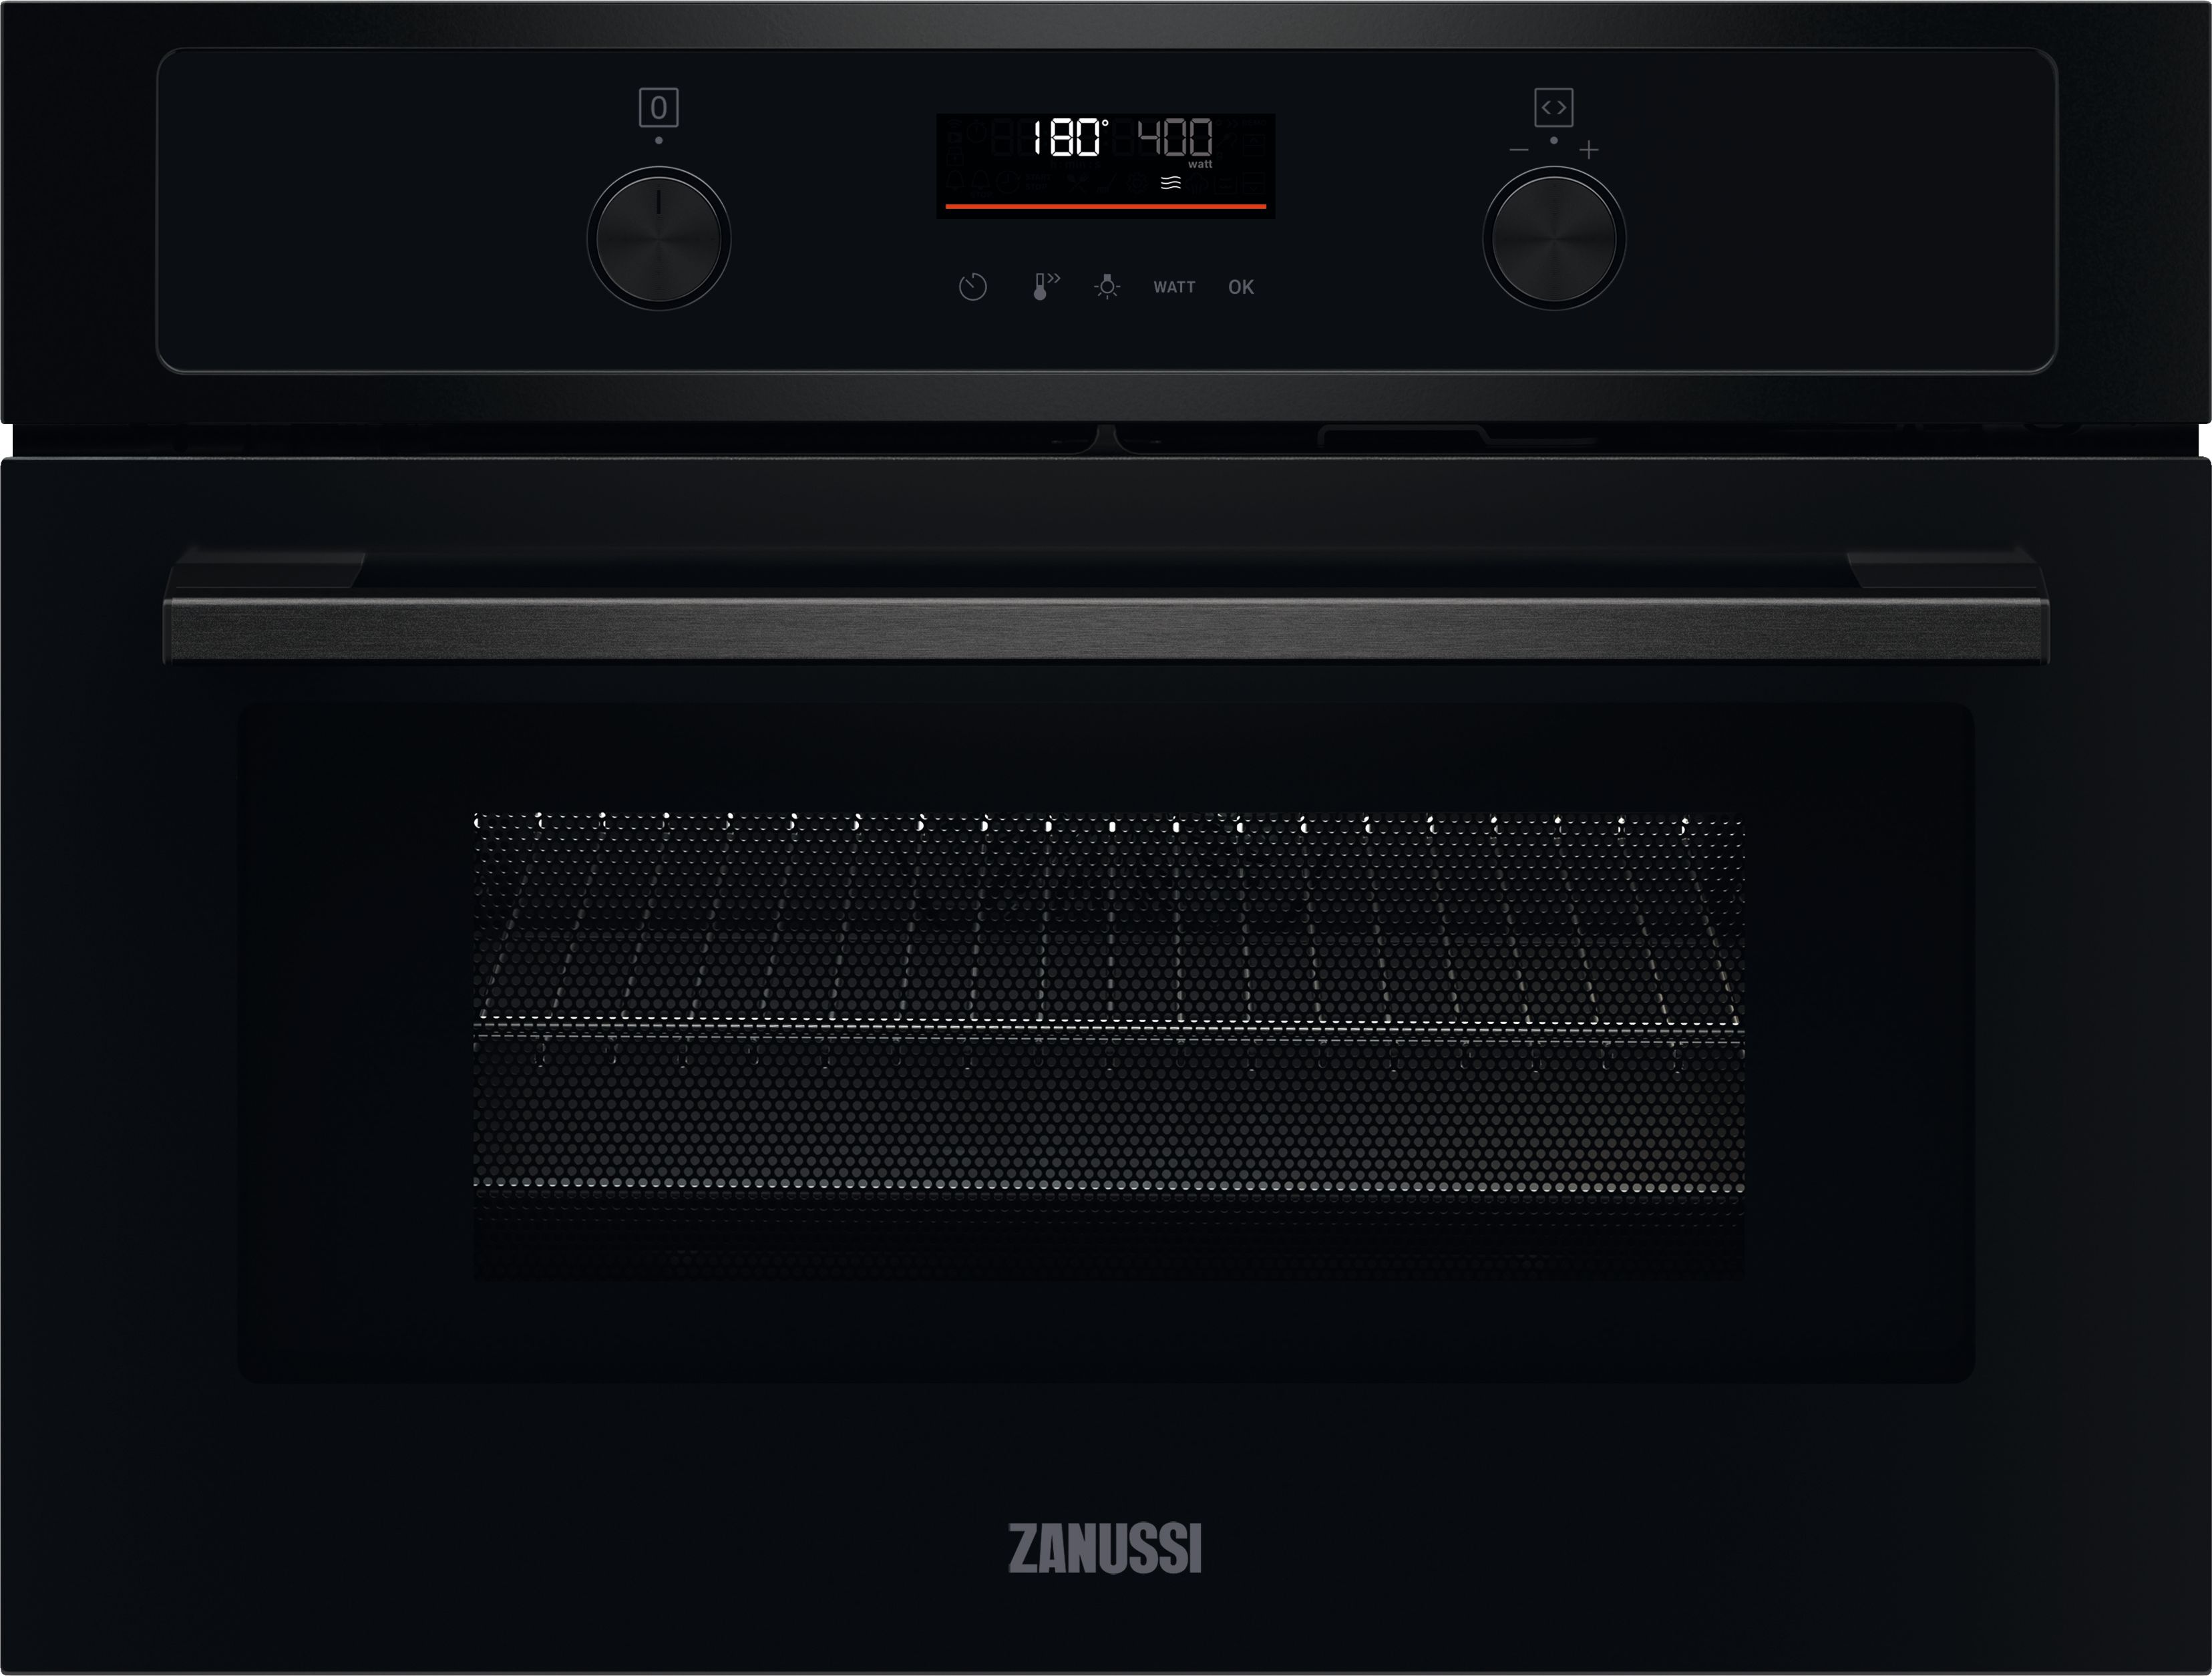 Zanussi ZVENM7KN Built In Compact Electric Single Oven with Microwave Function - Black, Black